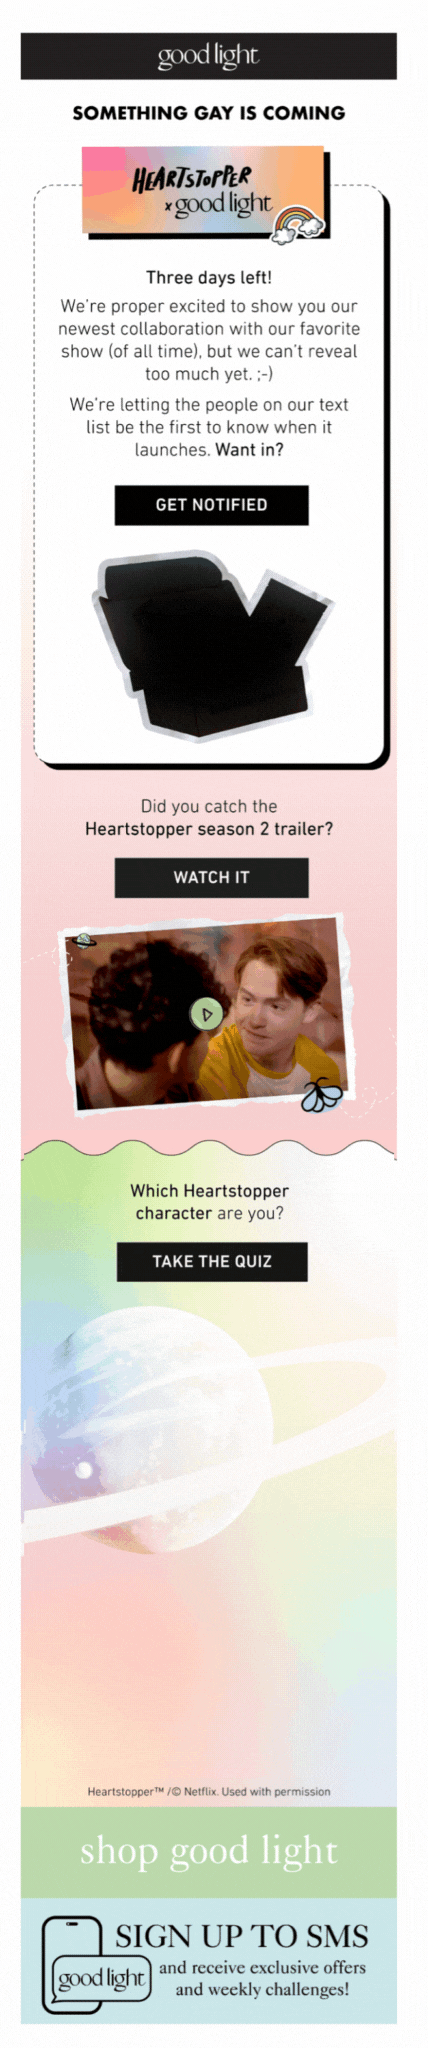 Gamified email from Good Light that announces the release of the Heartstopper collection and features a show-themed personality quiz